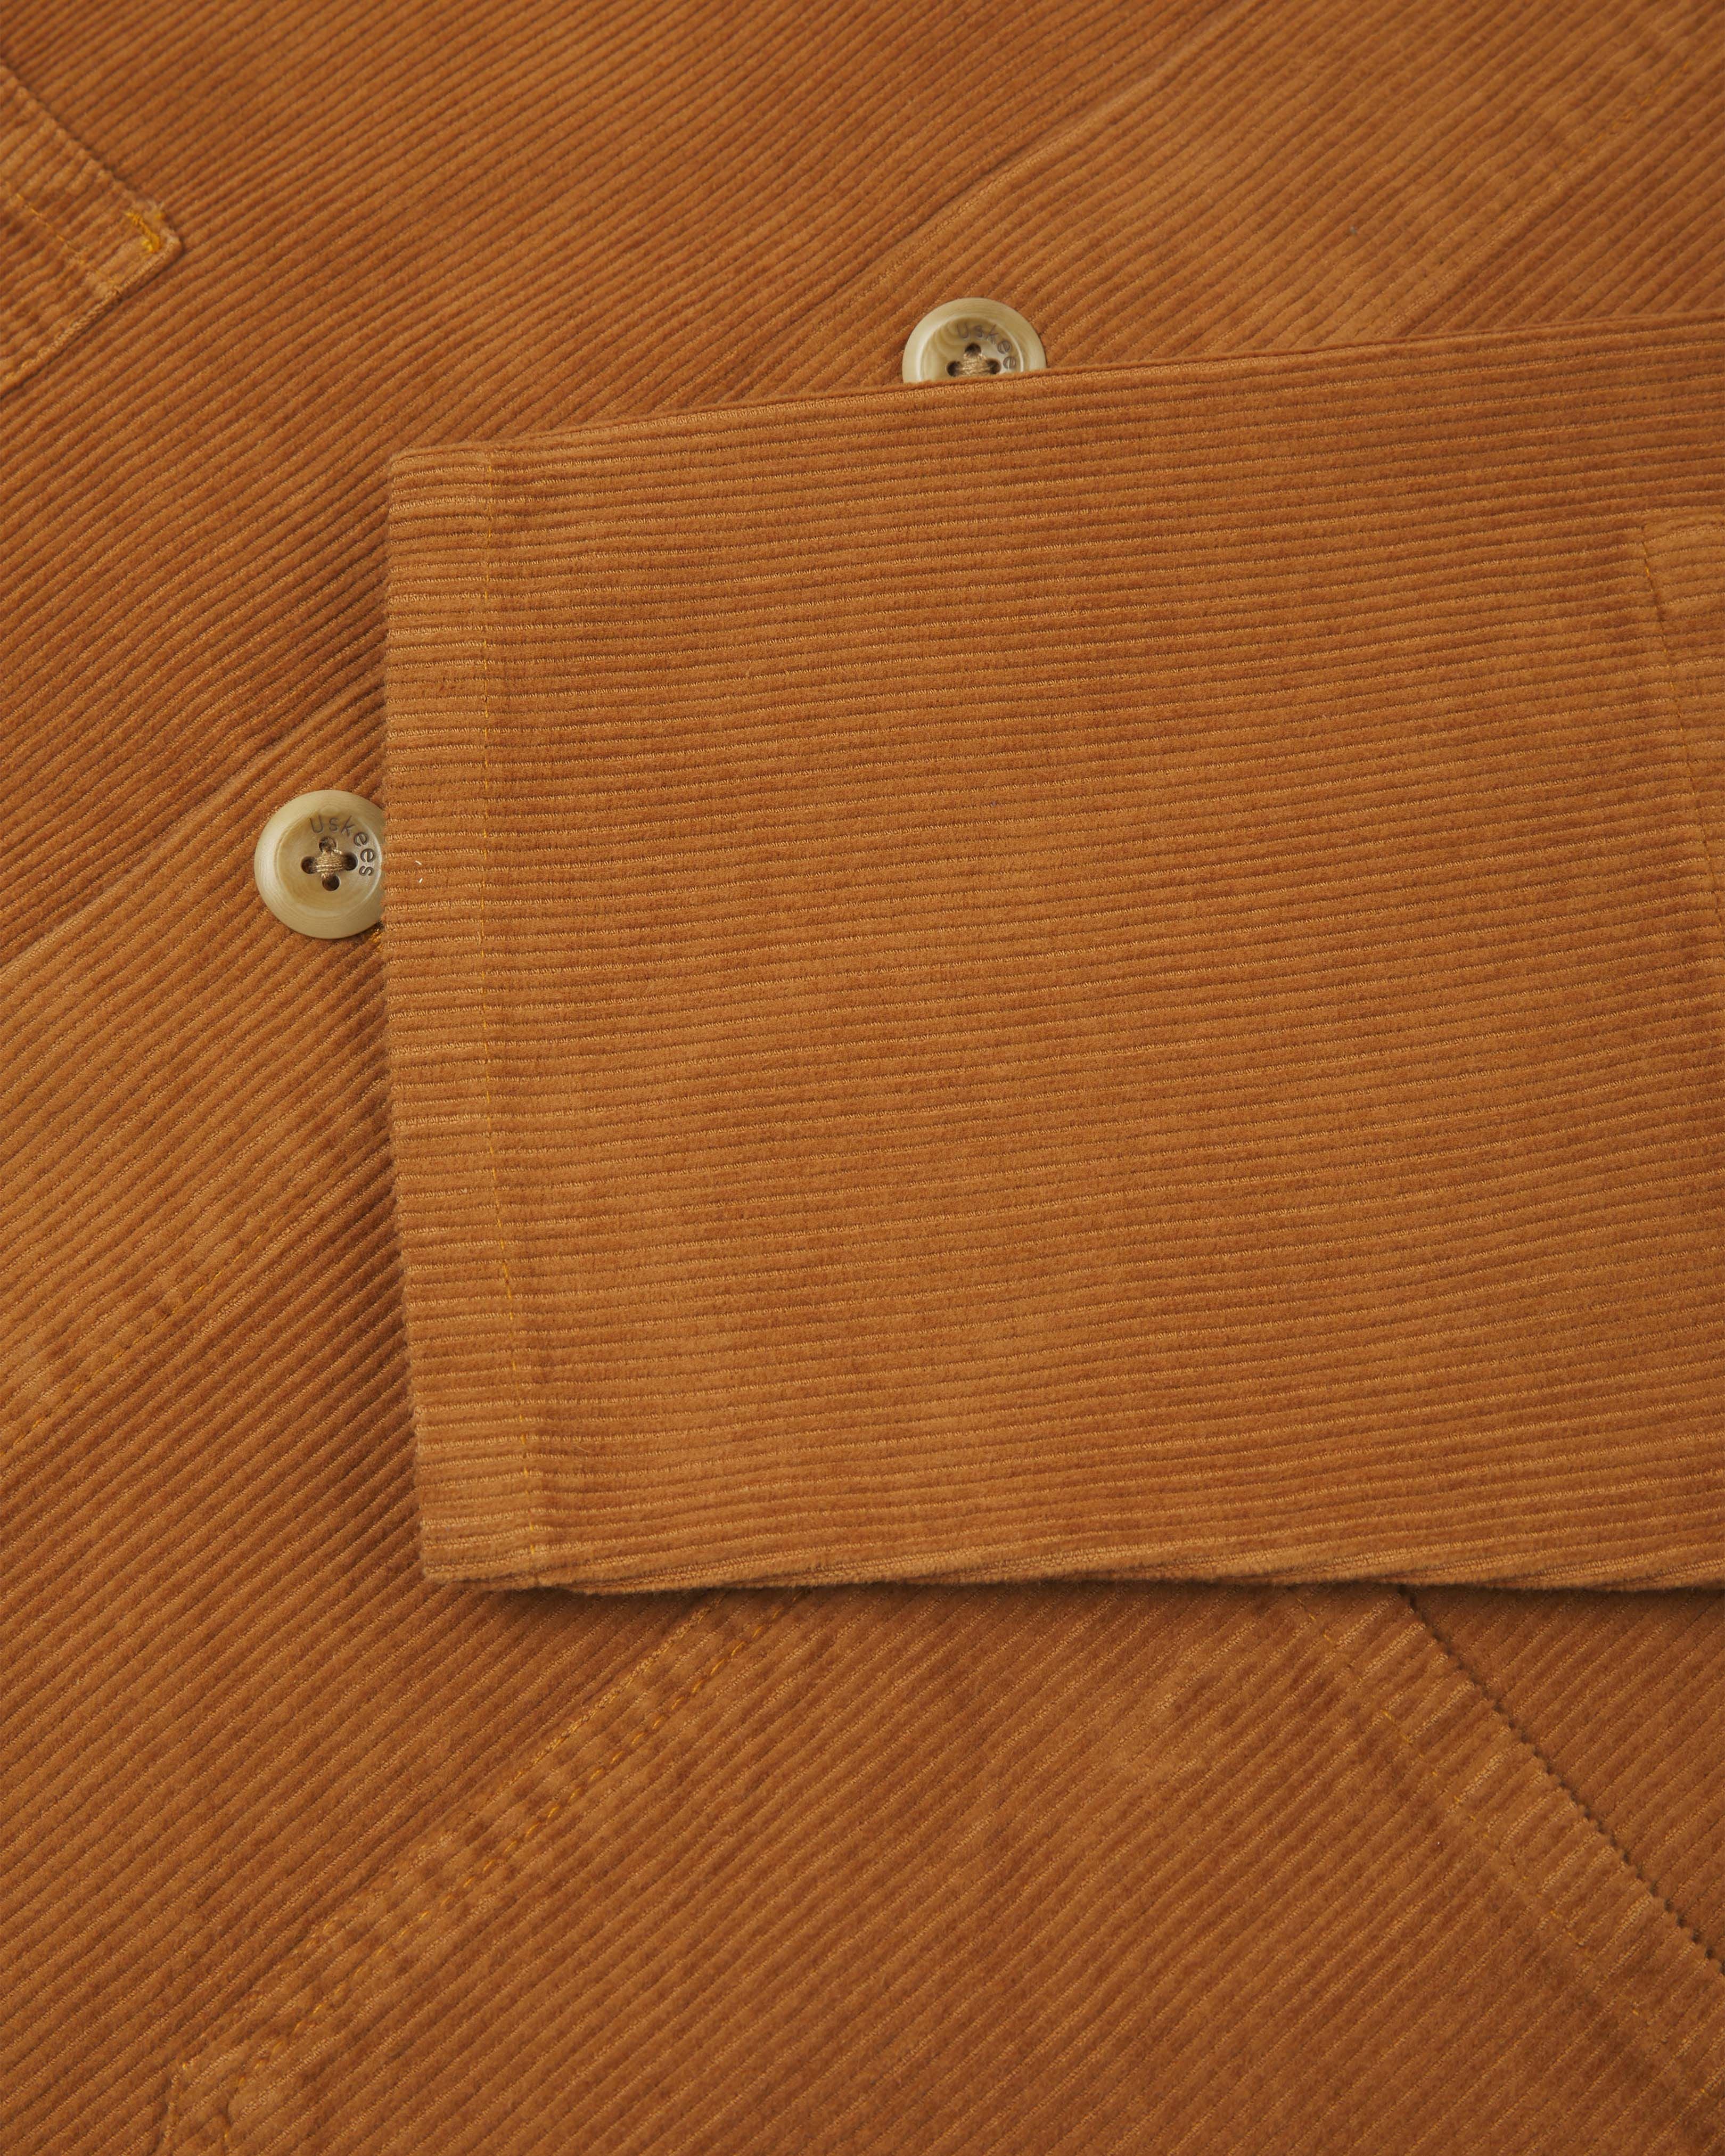 Close up shot of Uskees tan corduroy #3001 over-shirt clearly showing corozo buttons and sleeve detail